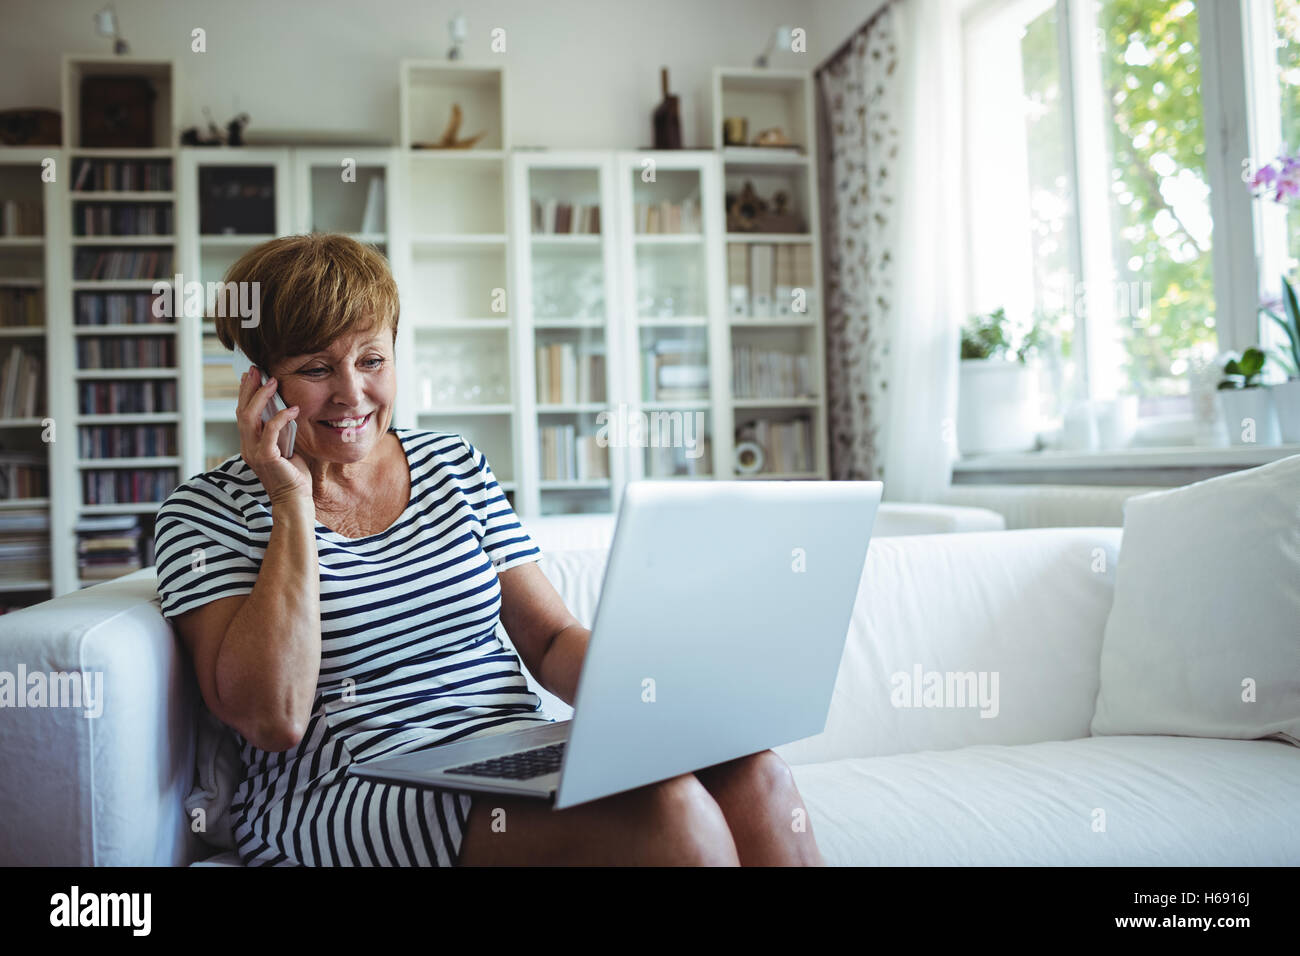 Senior Woman talking on mobile phone while using laptop in living room Banque D'Images